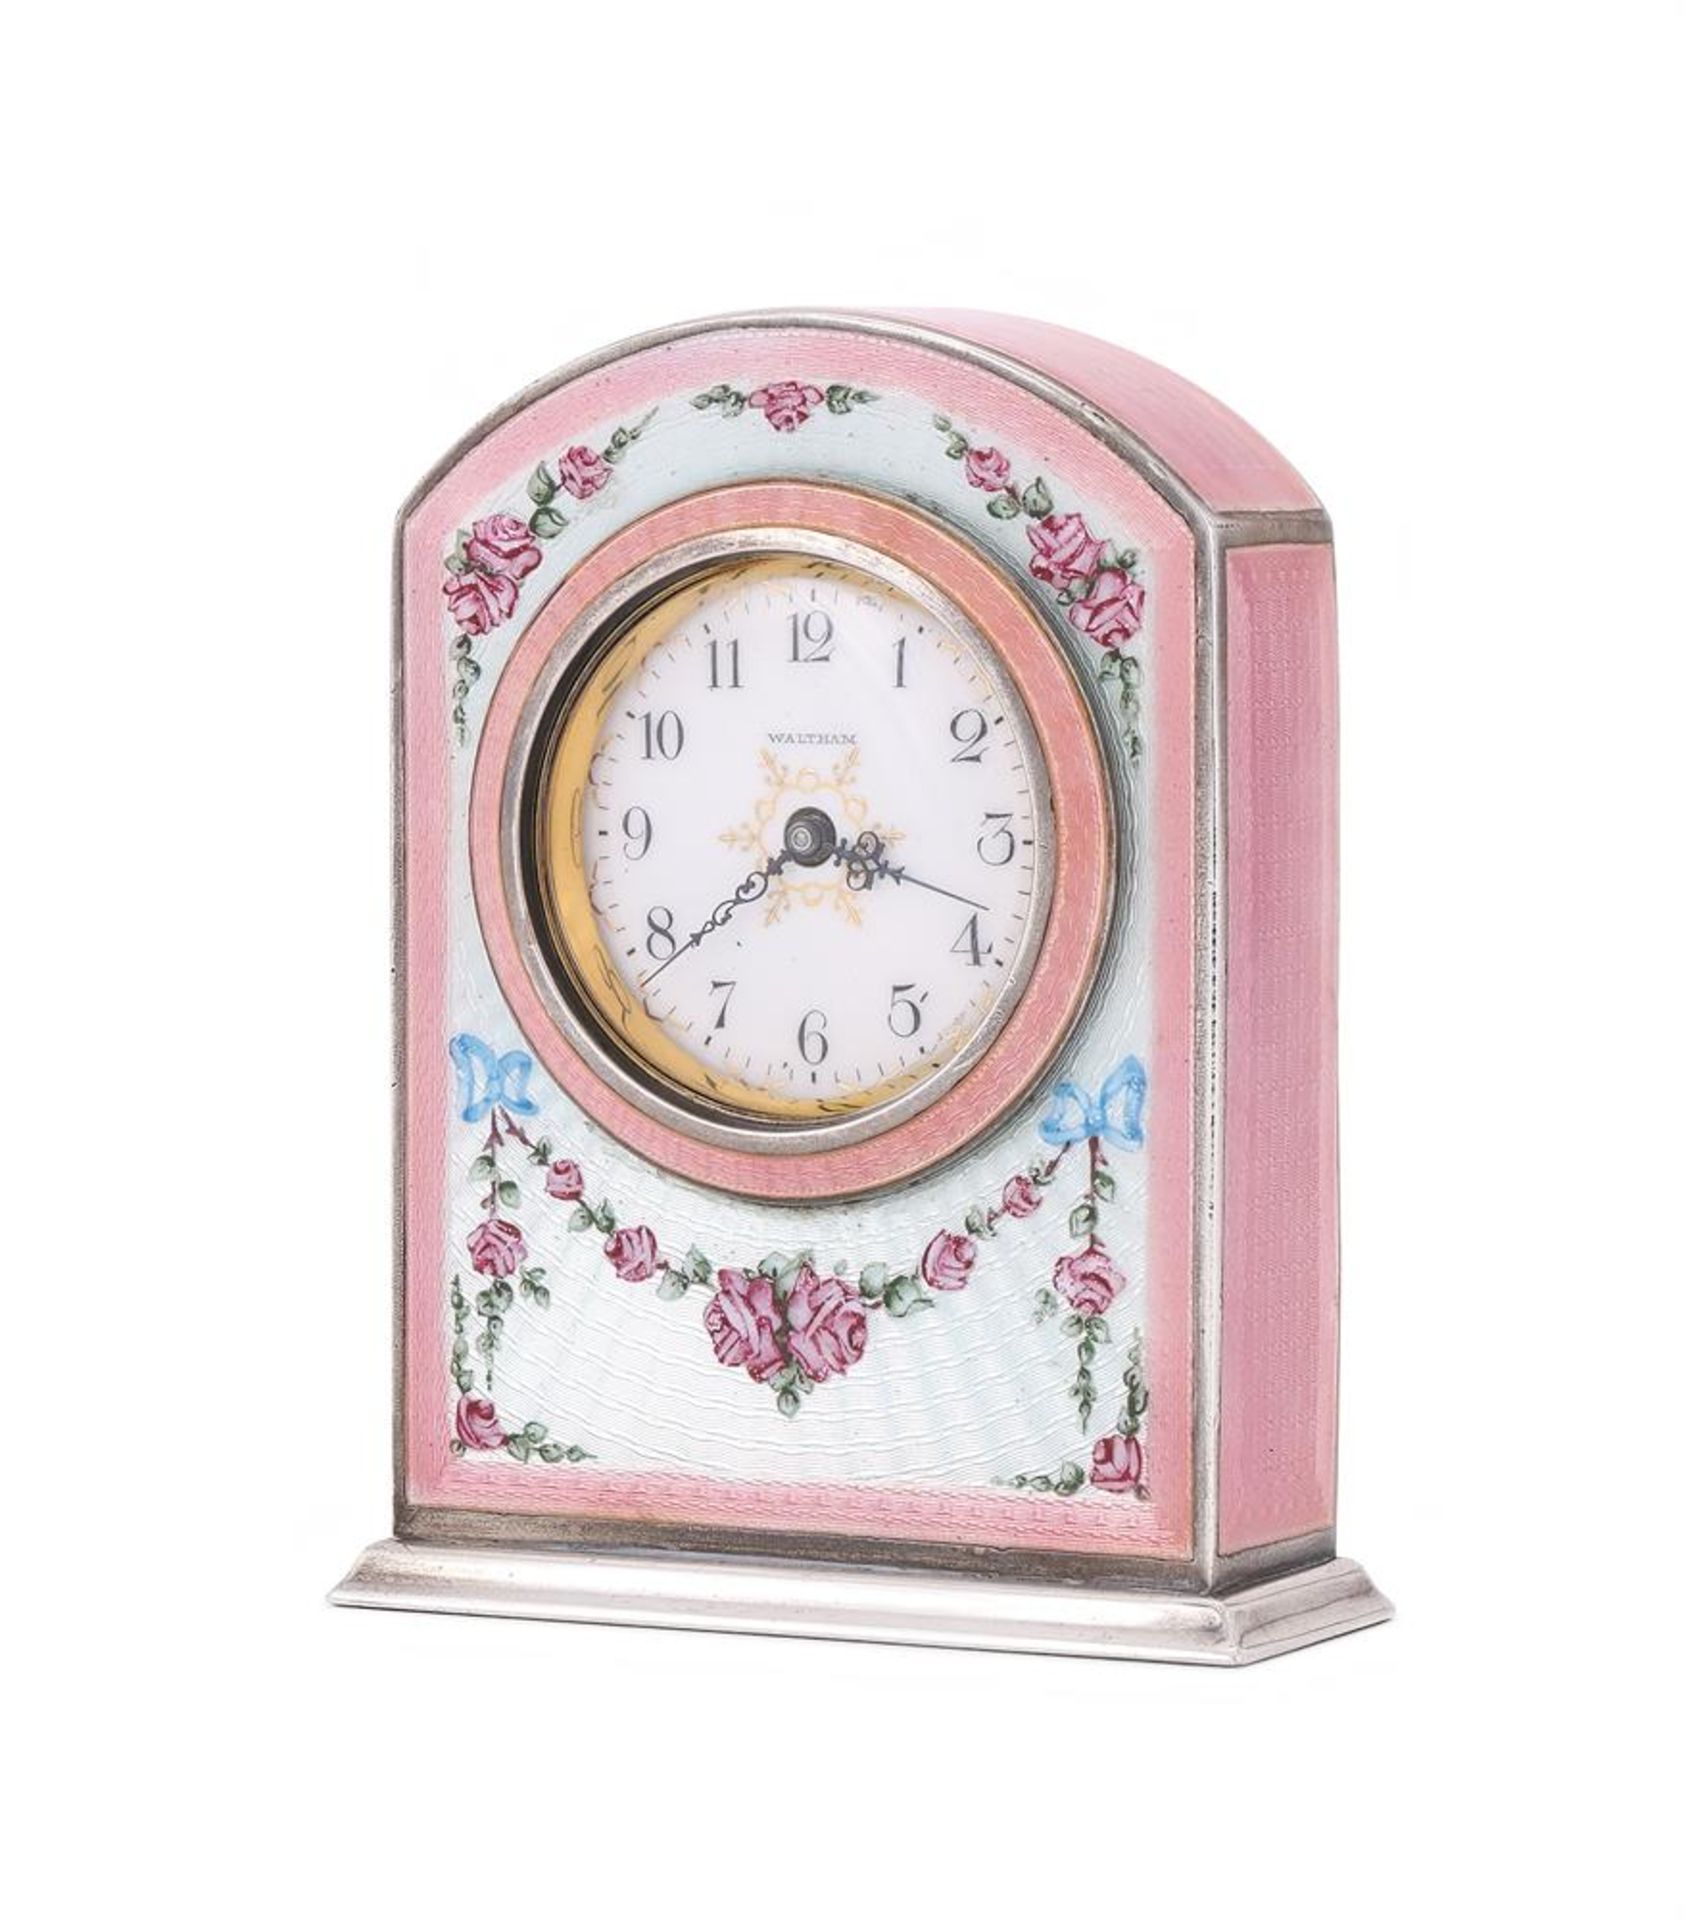 AN AMERICAN SILVER COLOURED AND ENAMEL 8-DAY DESK CLOCK